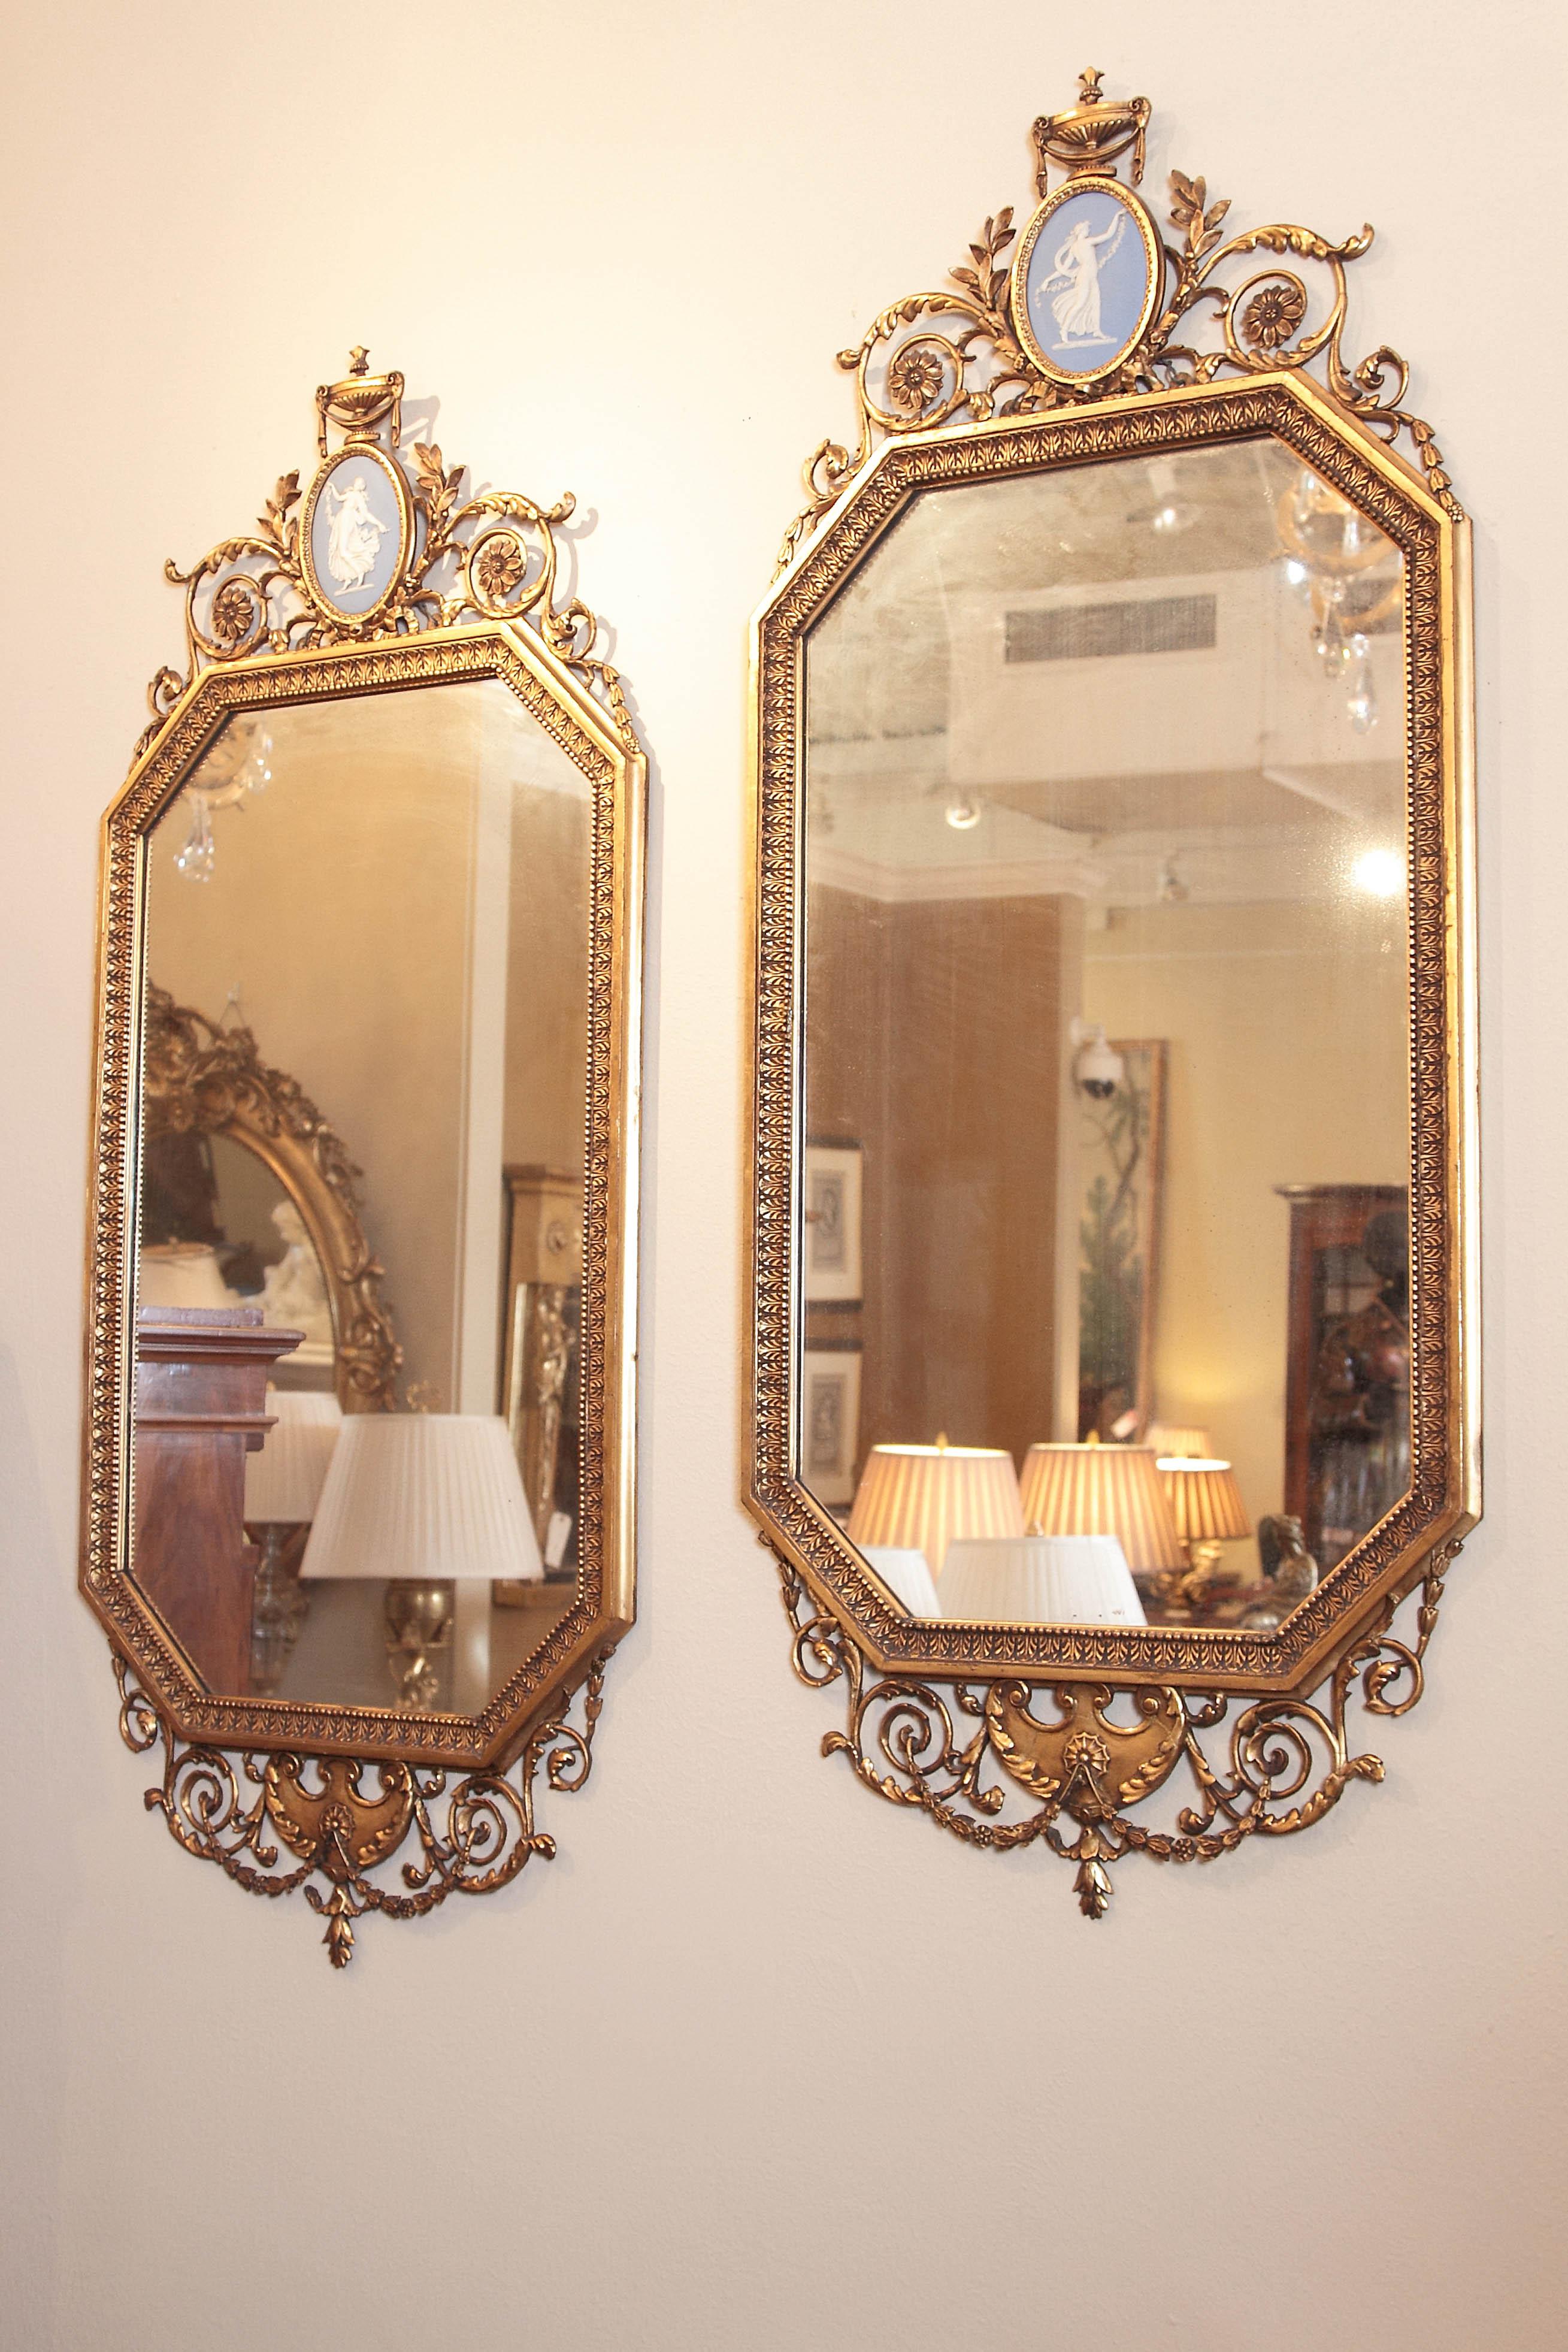 Pair of 19th Century English Water Gilt Hand-Carved Mirrors with Jasper Plaques 7